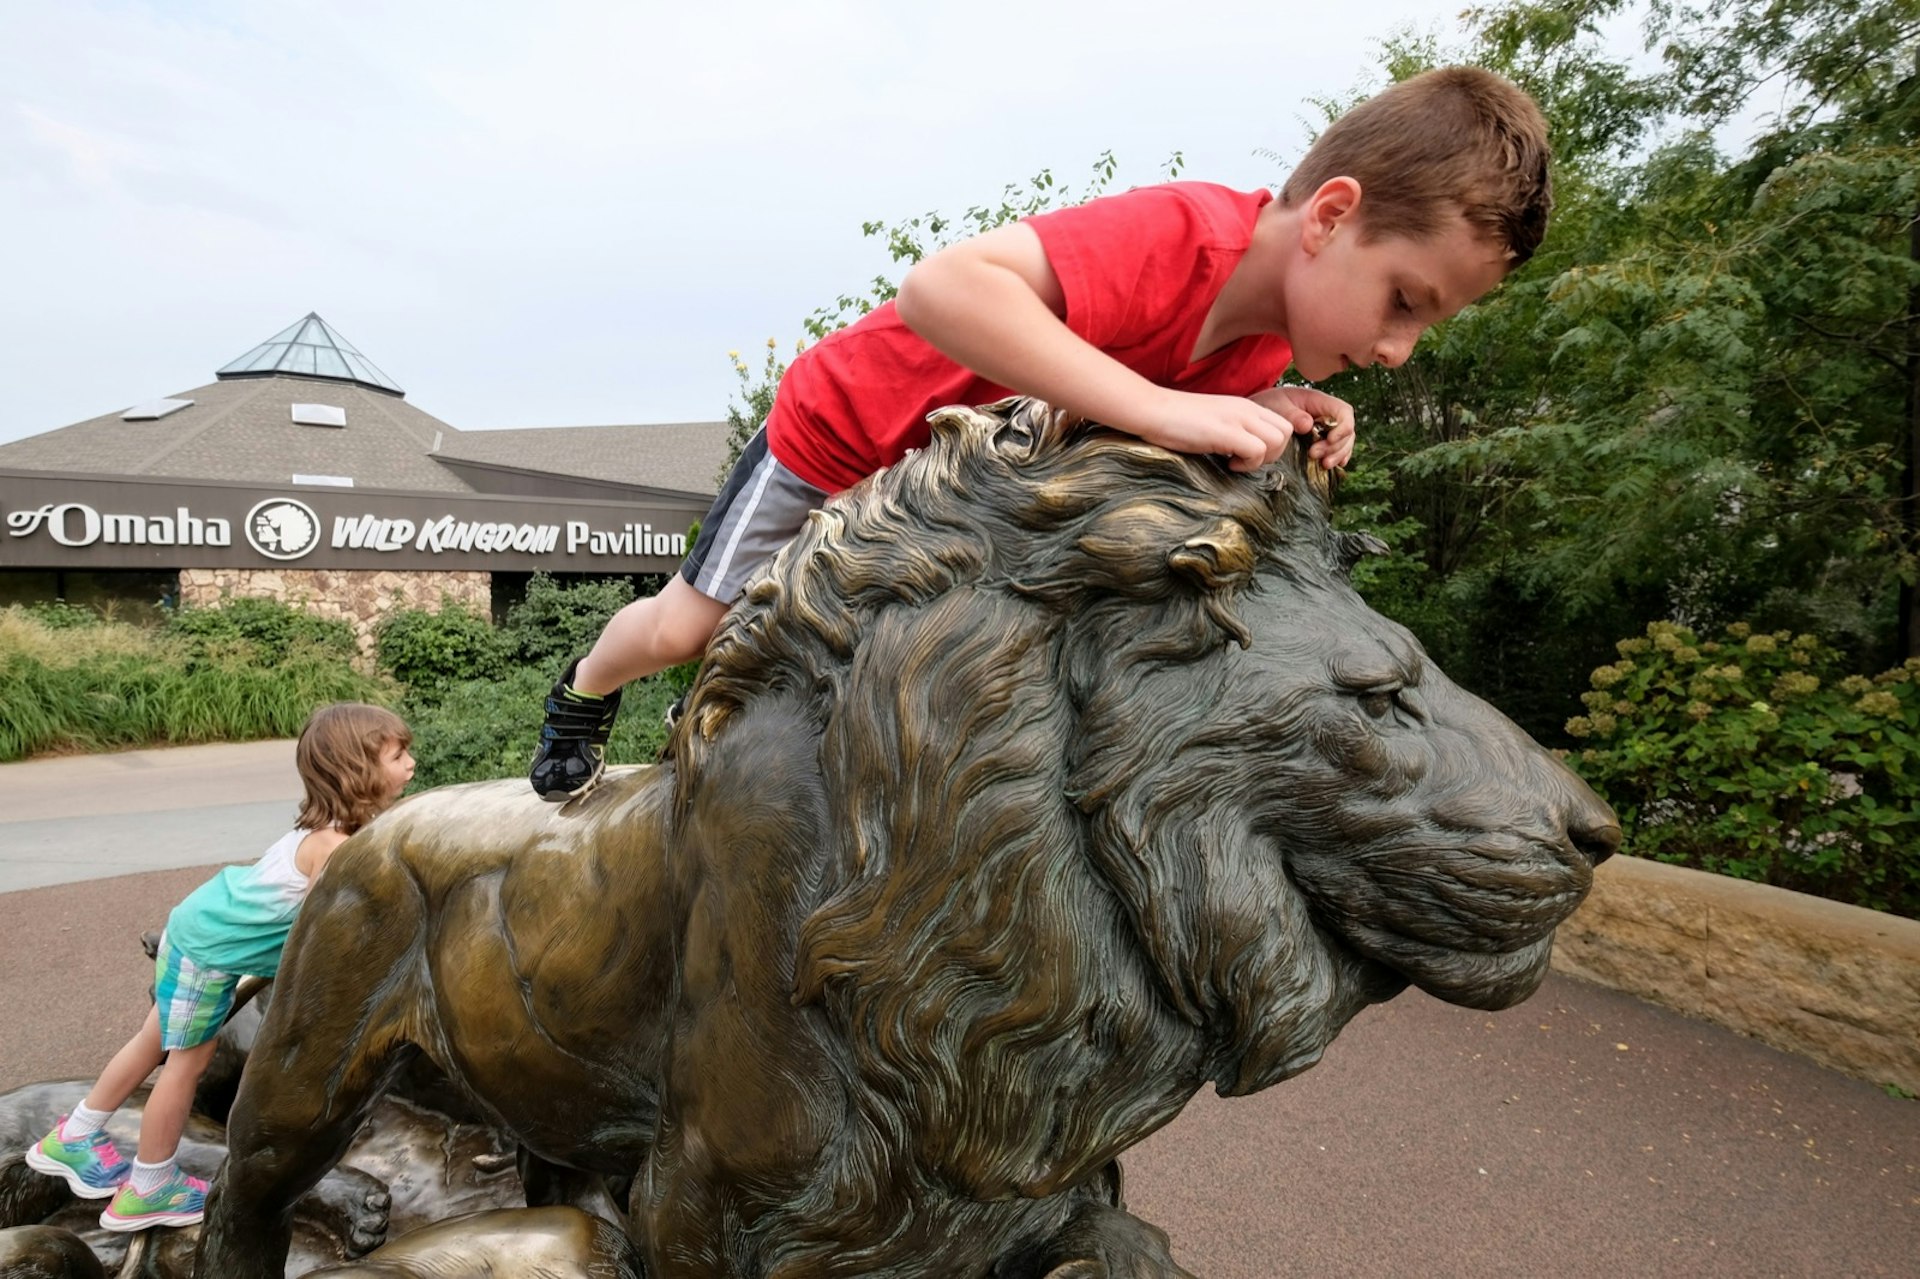 A young boy and a young girl climb on a bronze statue of a lion outside the Omaha Zoo